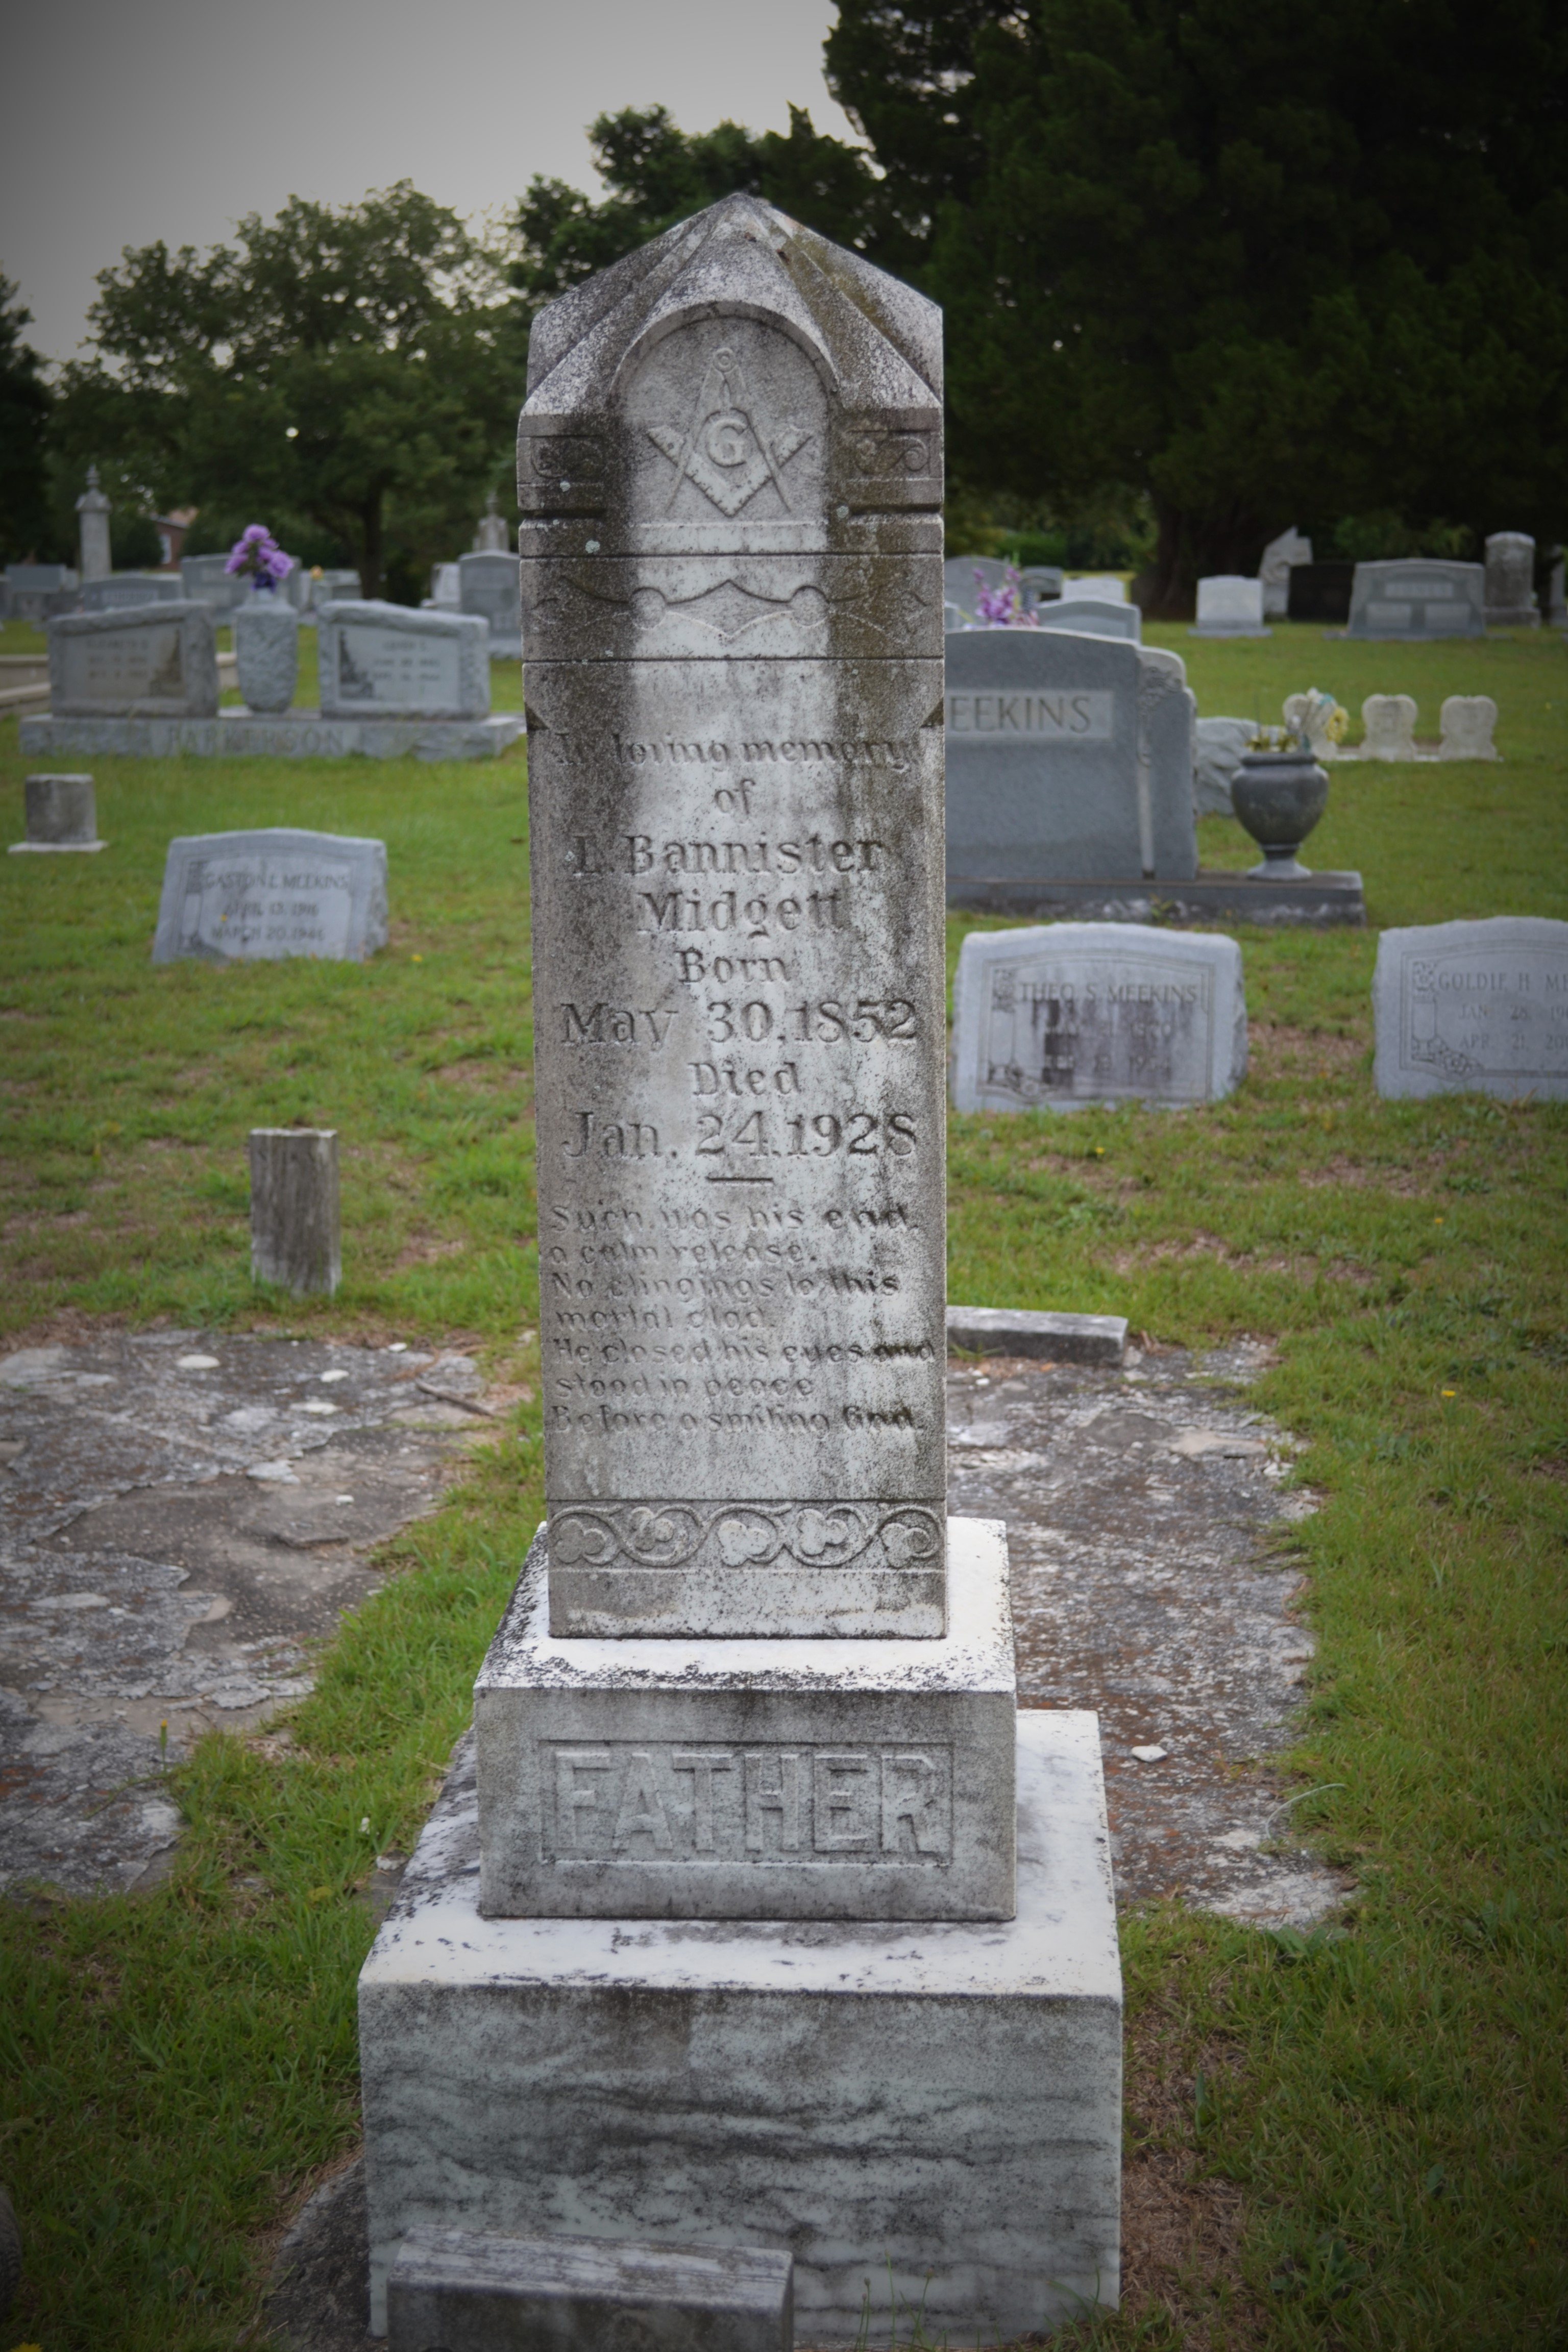 A gravestone for Midgett sits in a cemetery. It is a marble obelisk.